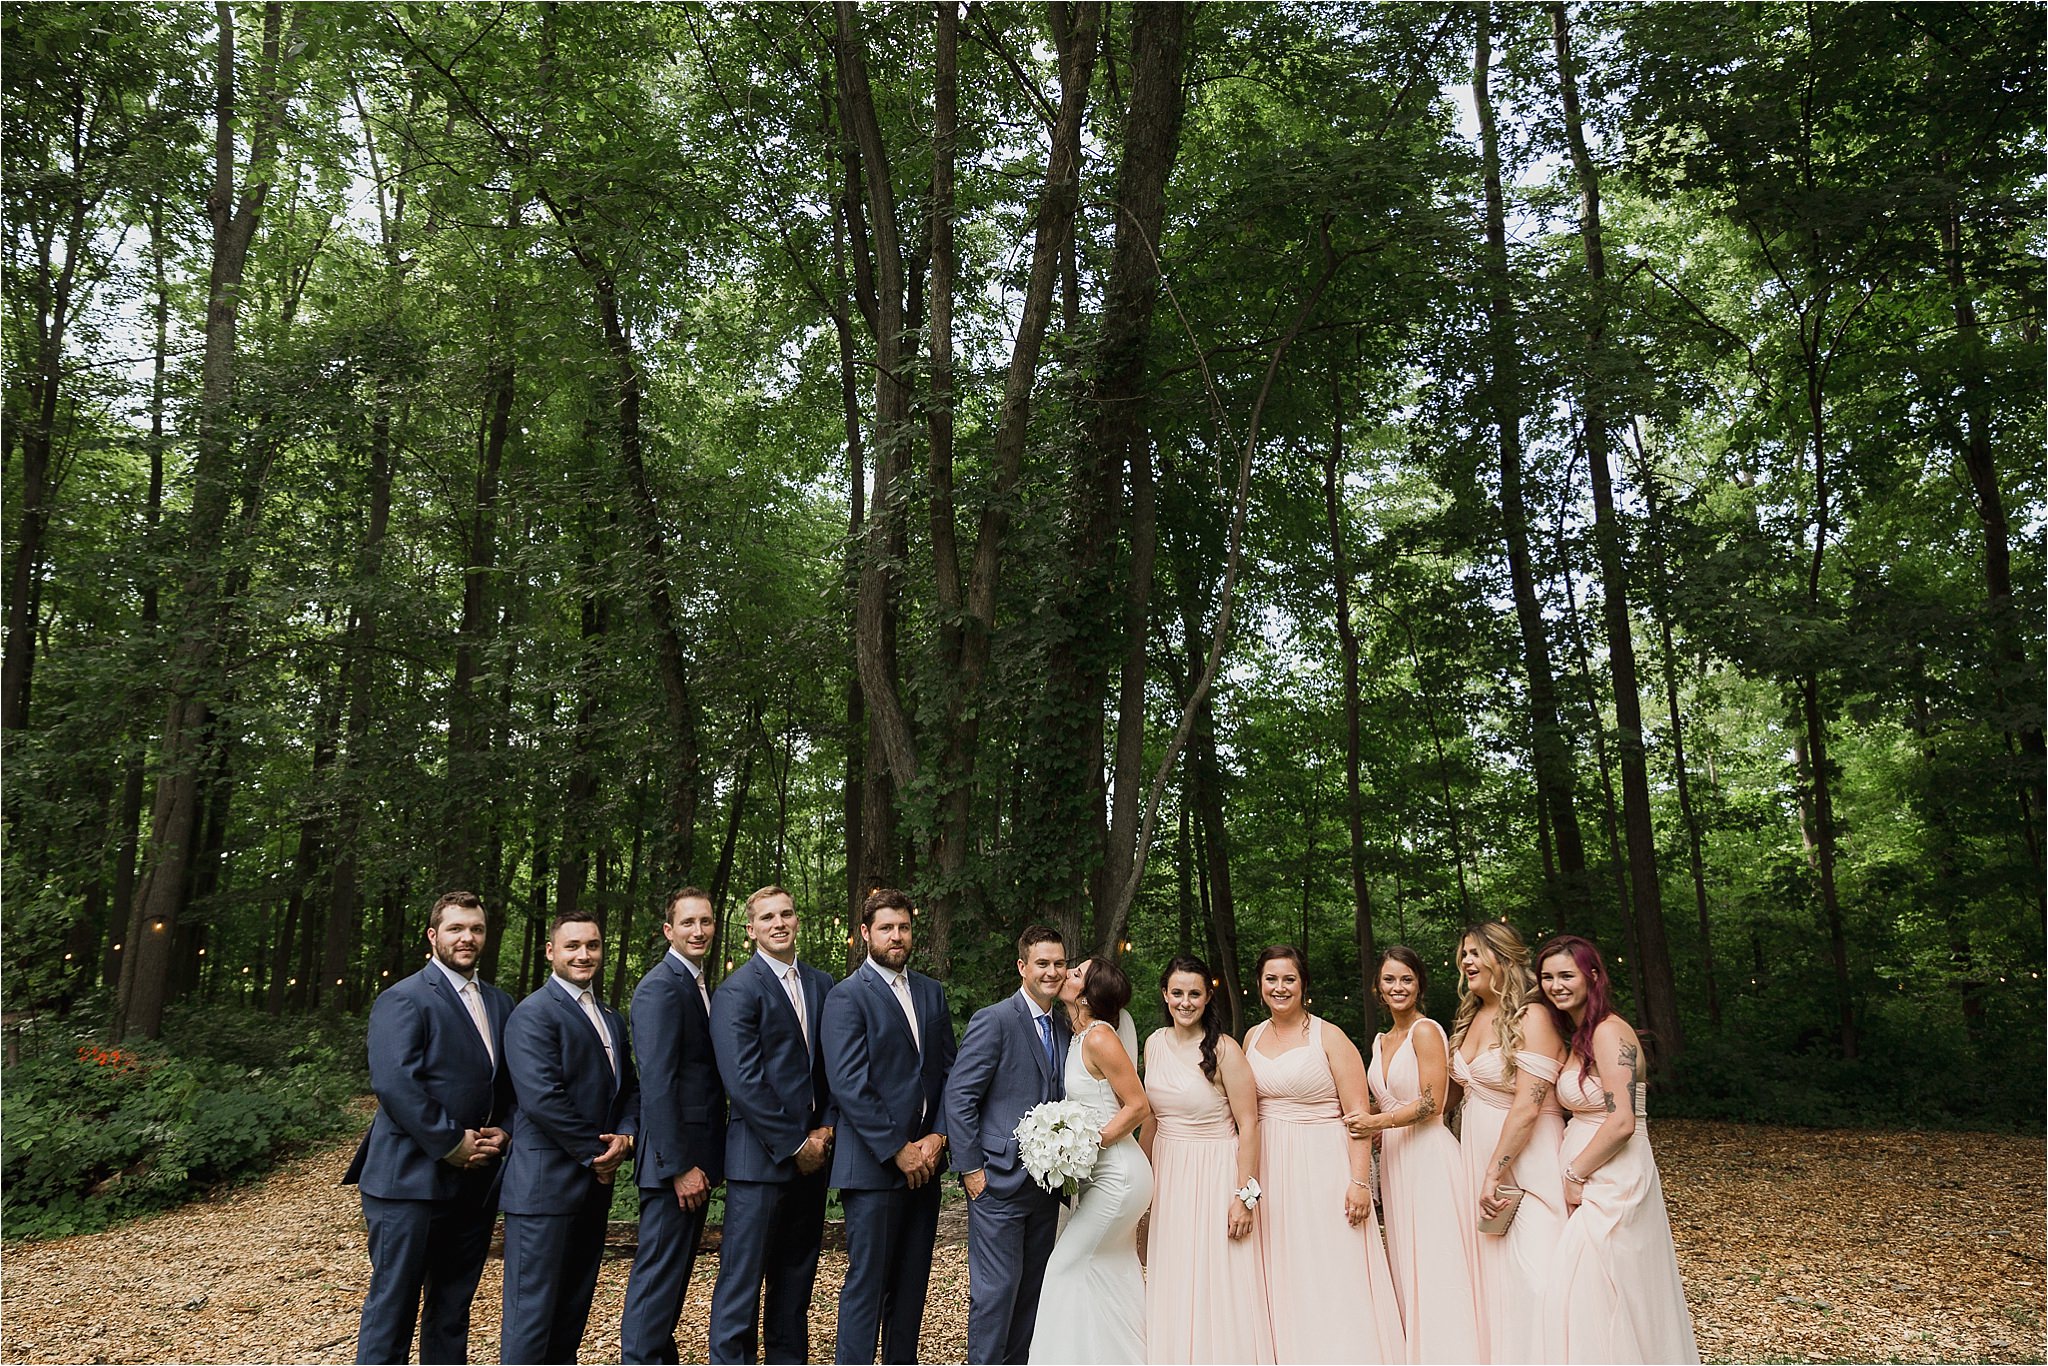 Sonia V Photography, The Clearing ceremony wedding venue, bridal party posing for a photo in the forest